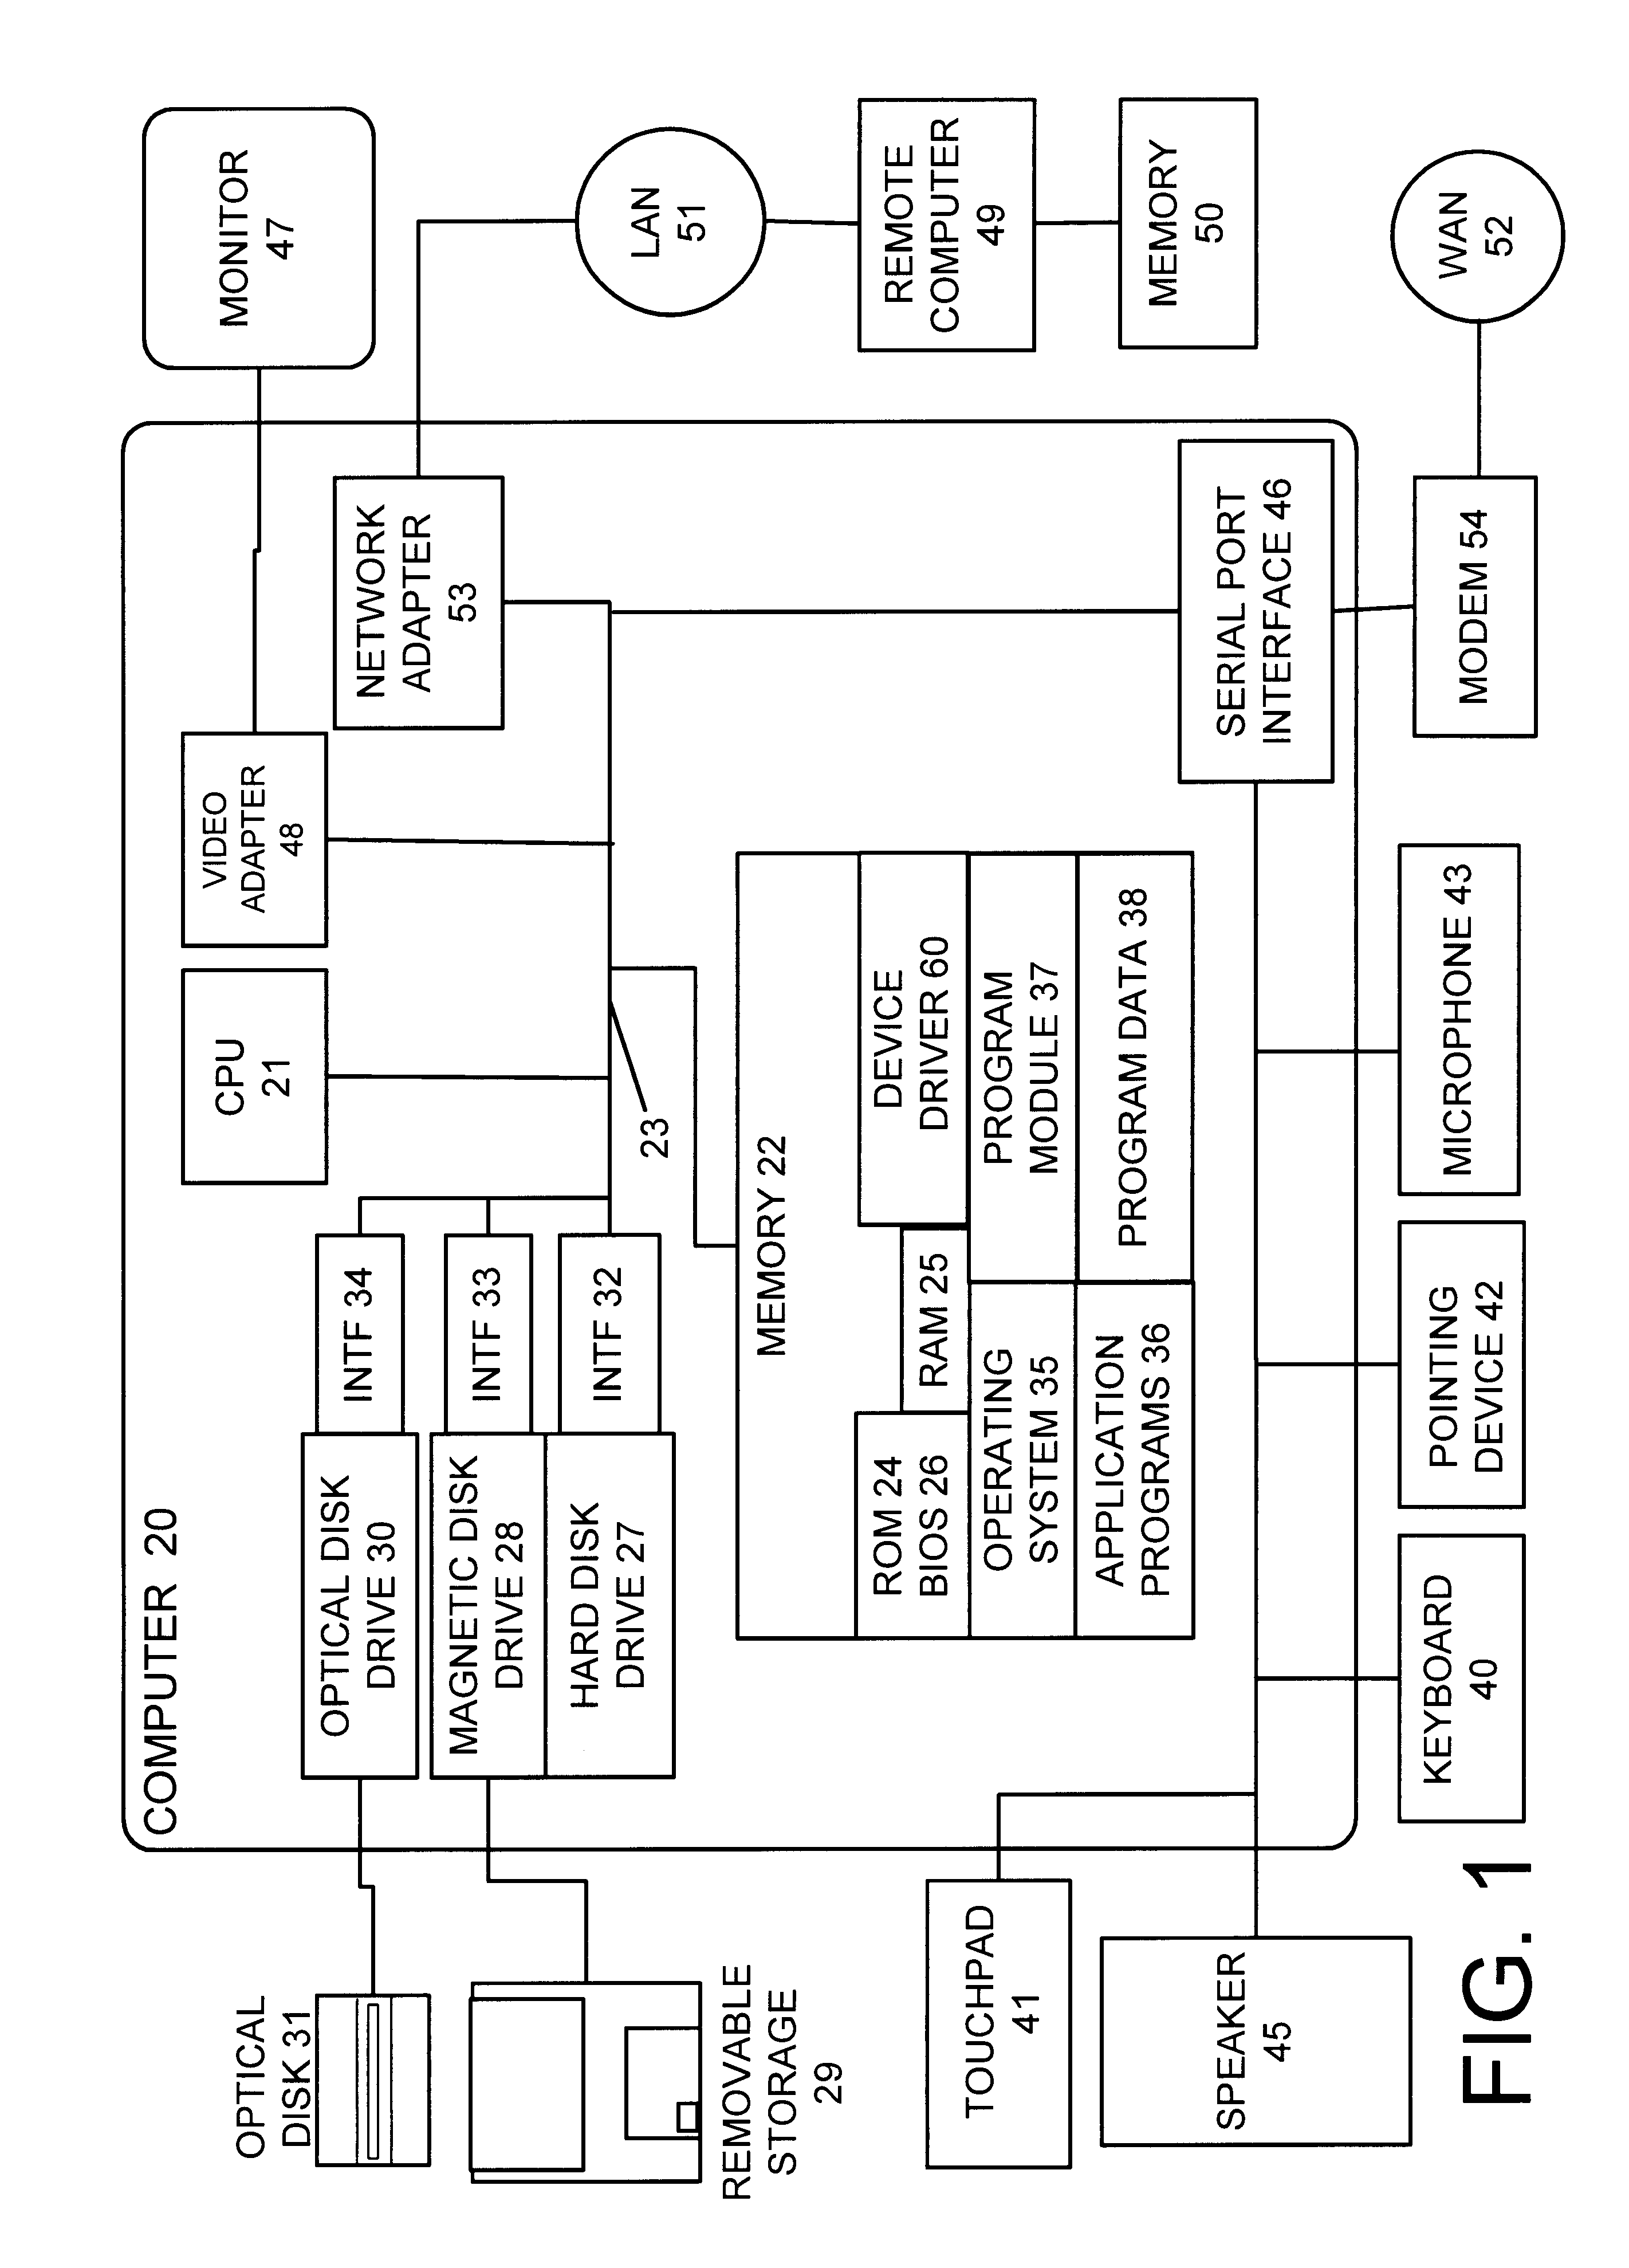 Method and apparatus for text layout across a region